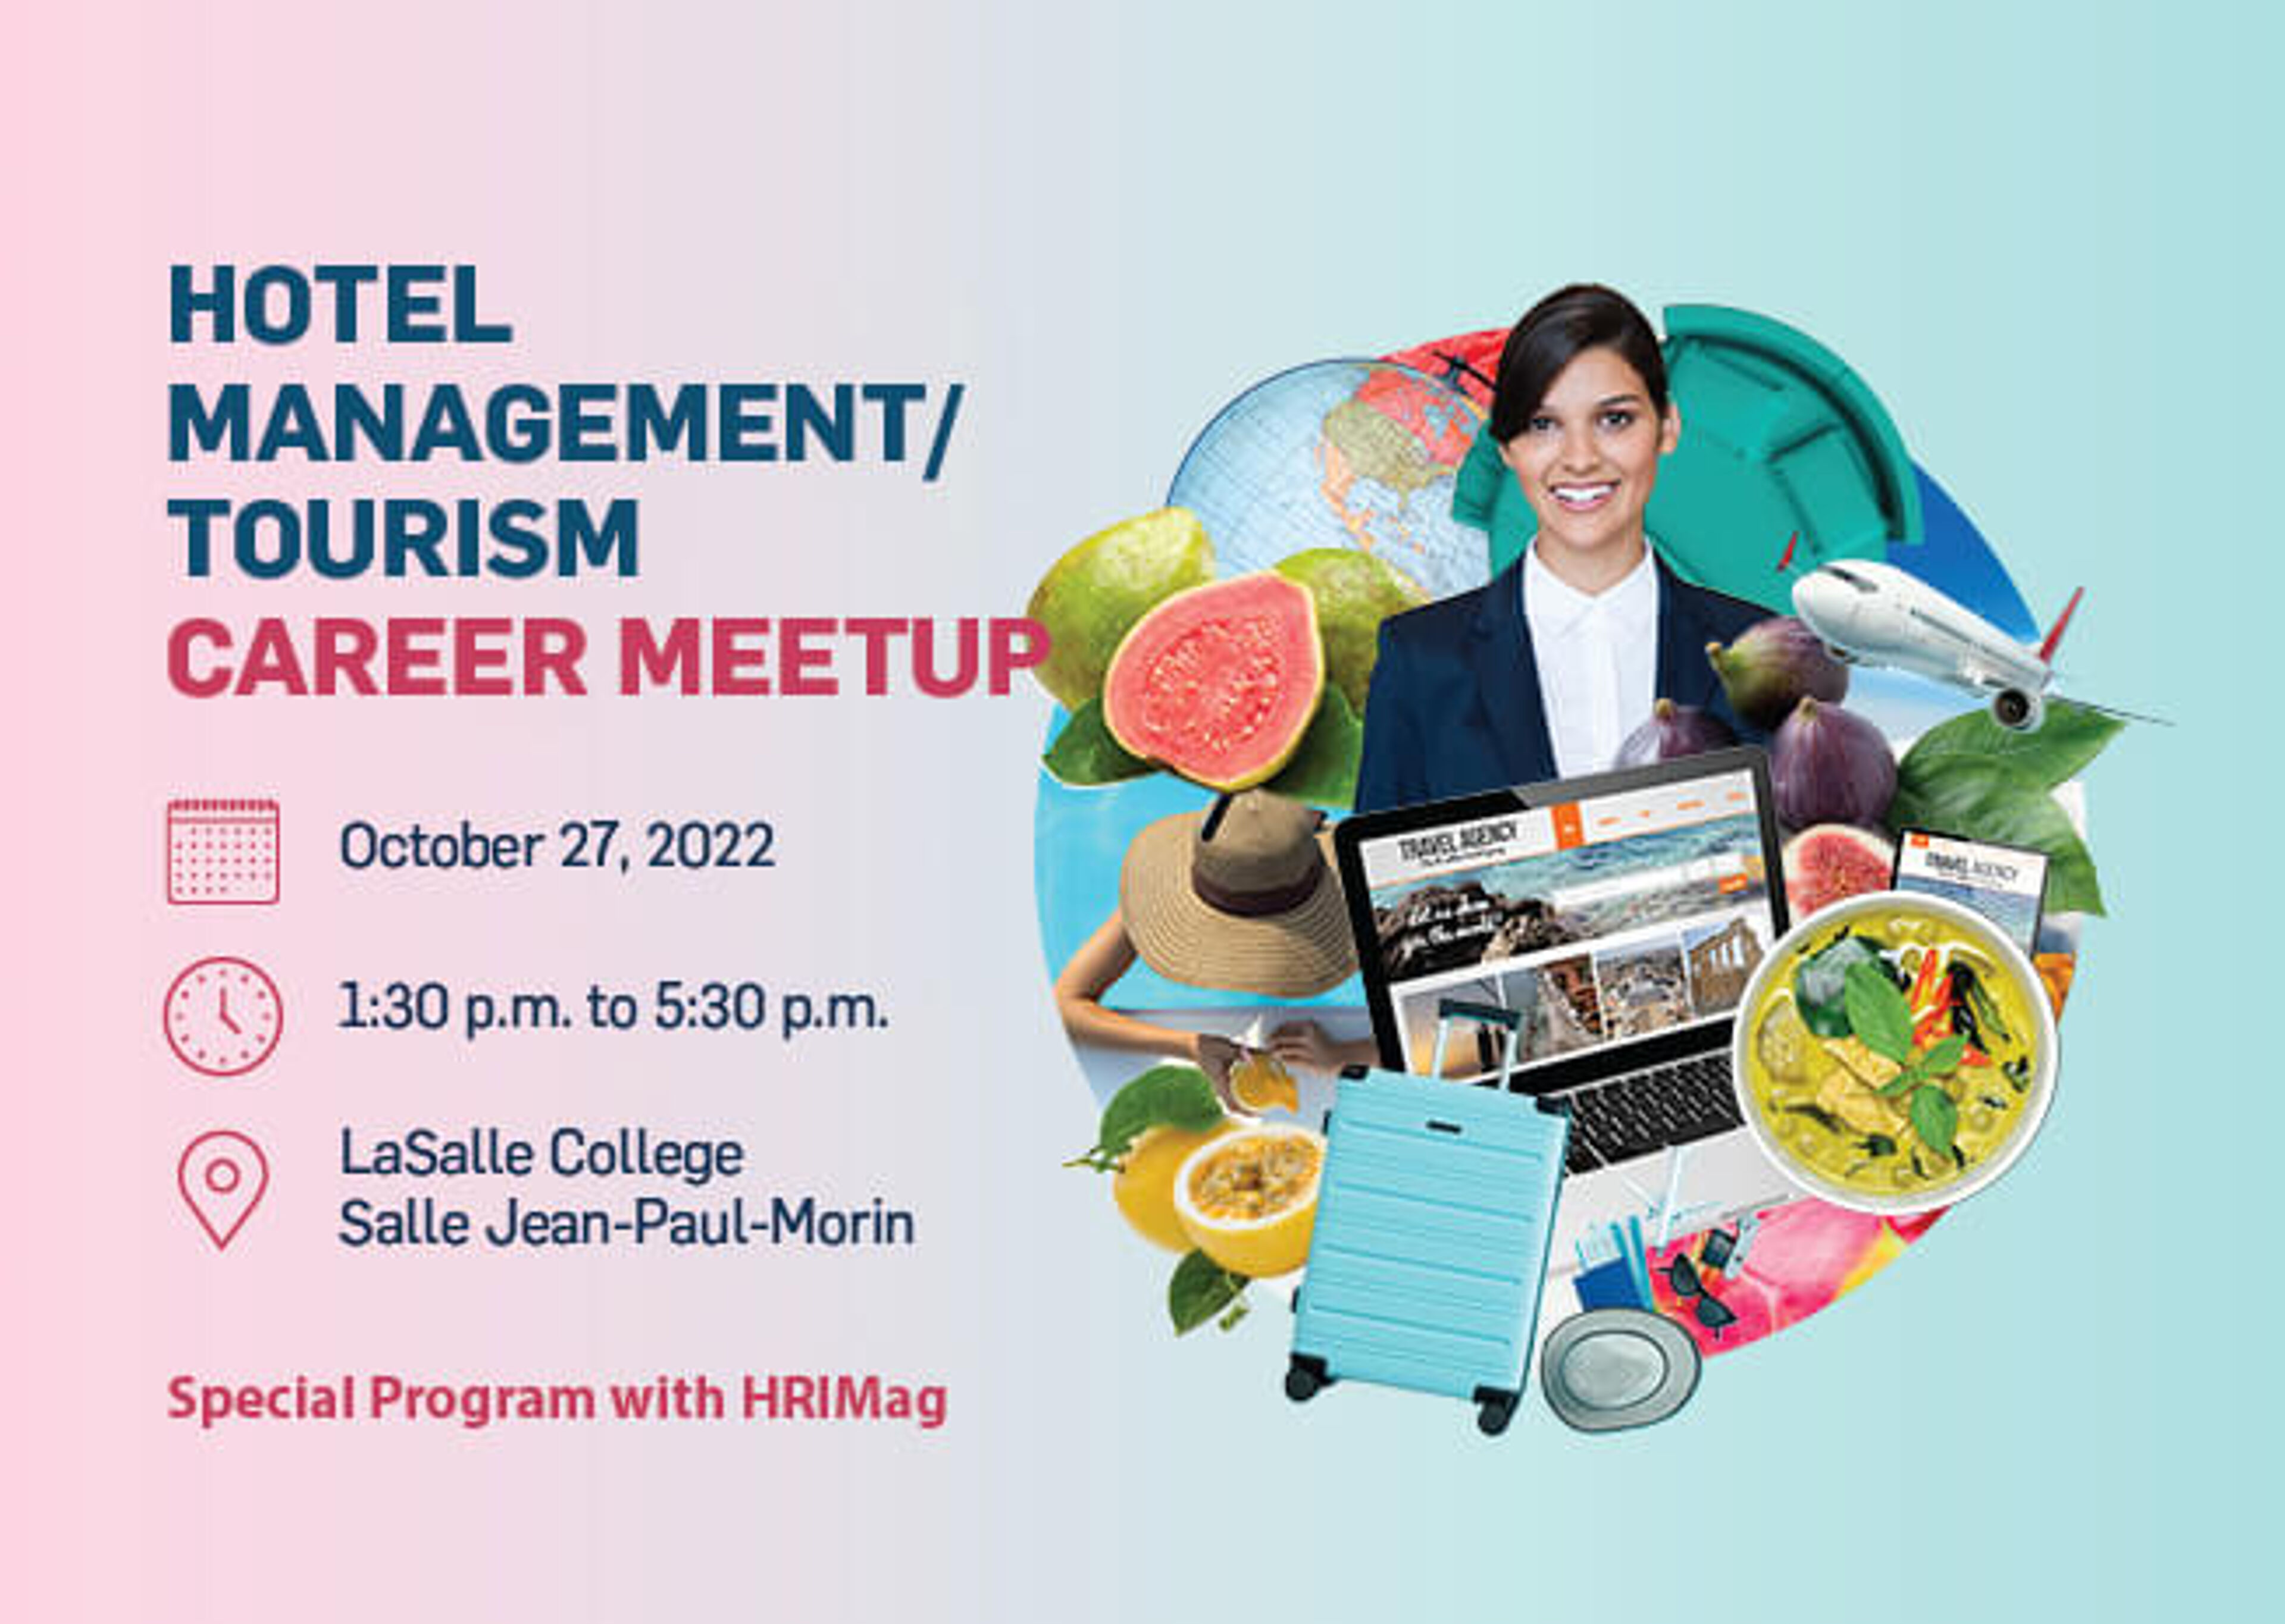 Networking event for hotel and tourism careers on October 27, with various industry symbols, hosted by LaSalle College.